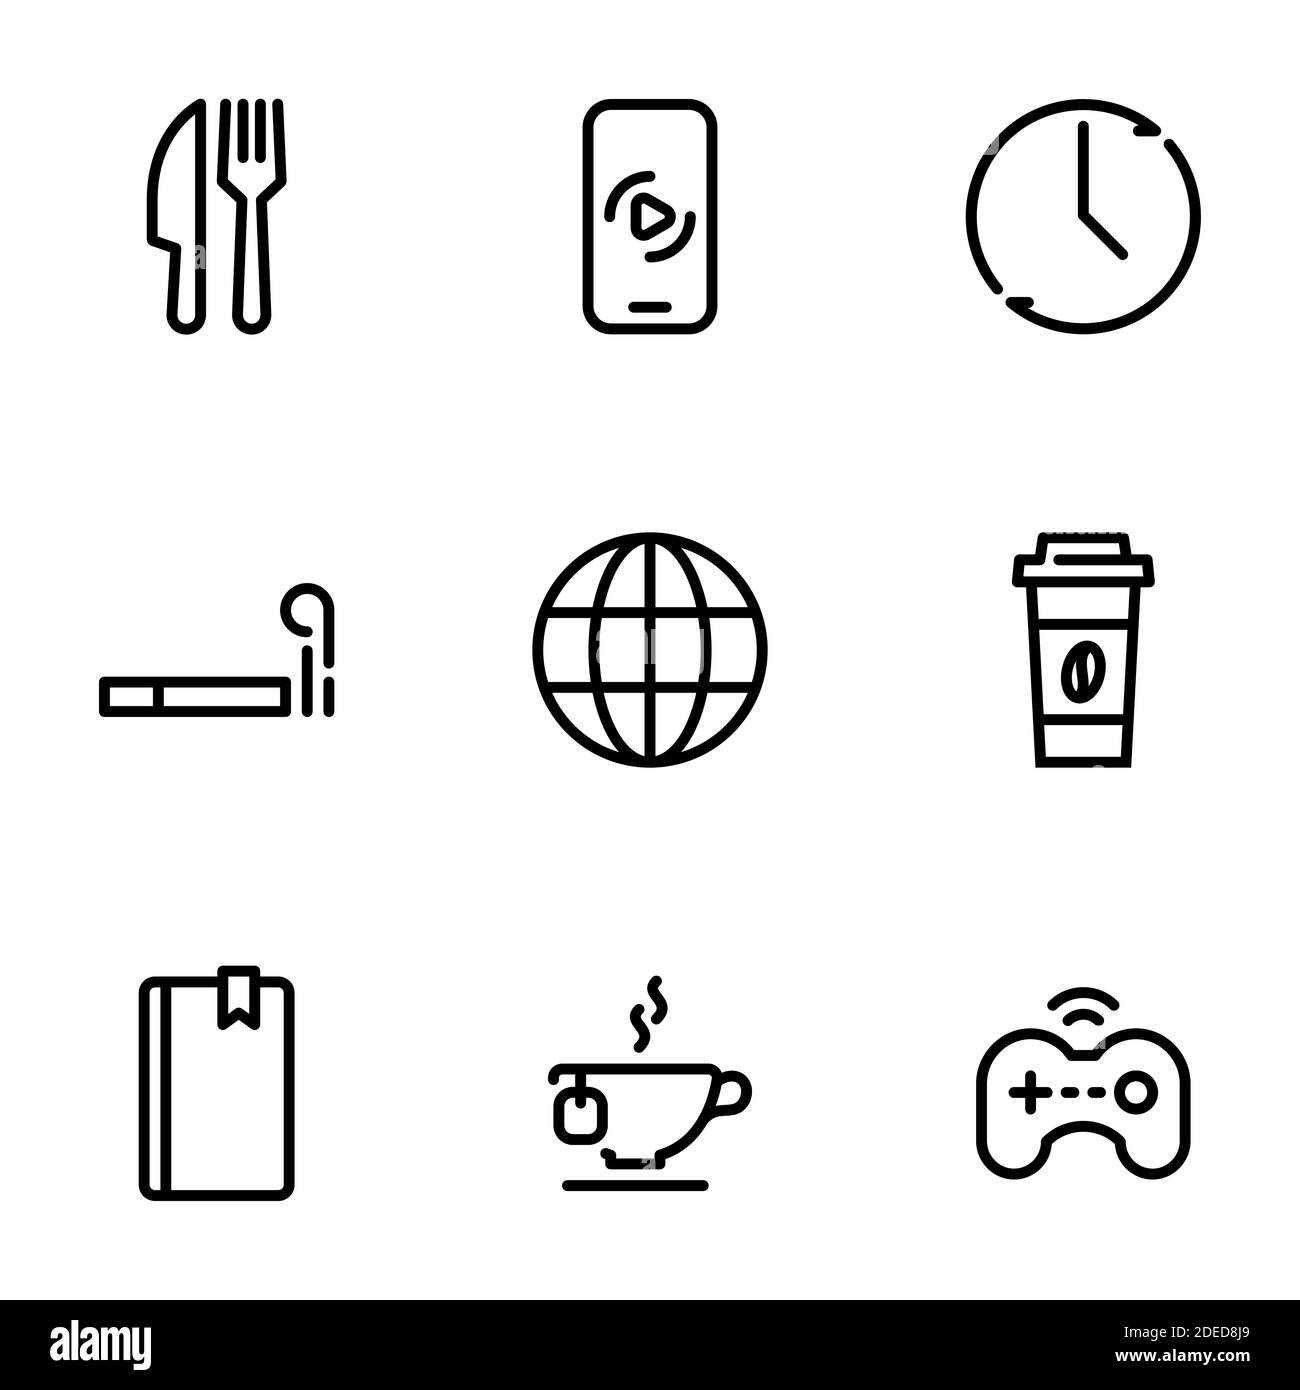 Set of black vector icons, isolated on white background, on theme Rest, break, entertainment Stock Vector